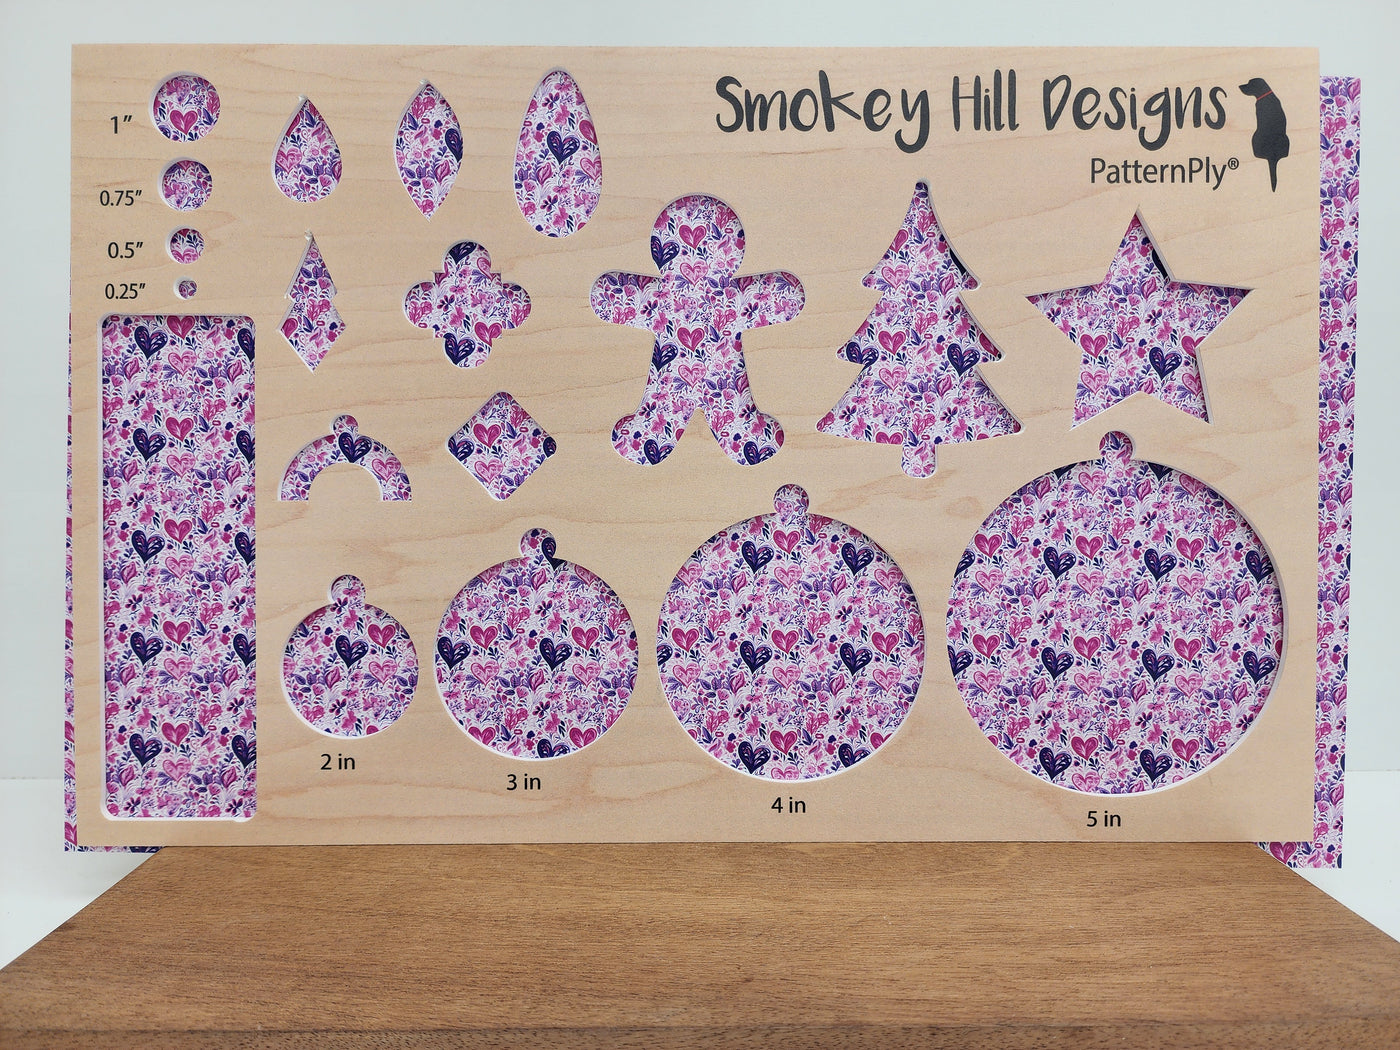 PatternPly® Pink and Purple Watercolor Hearts